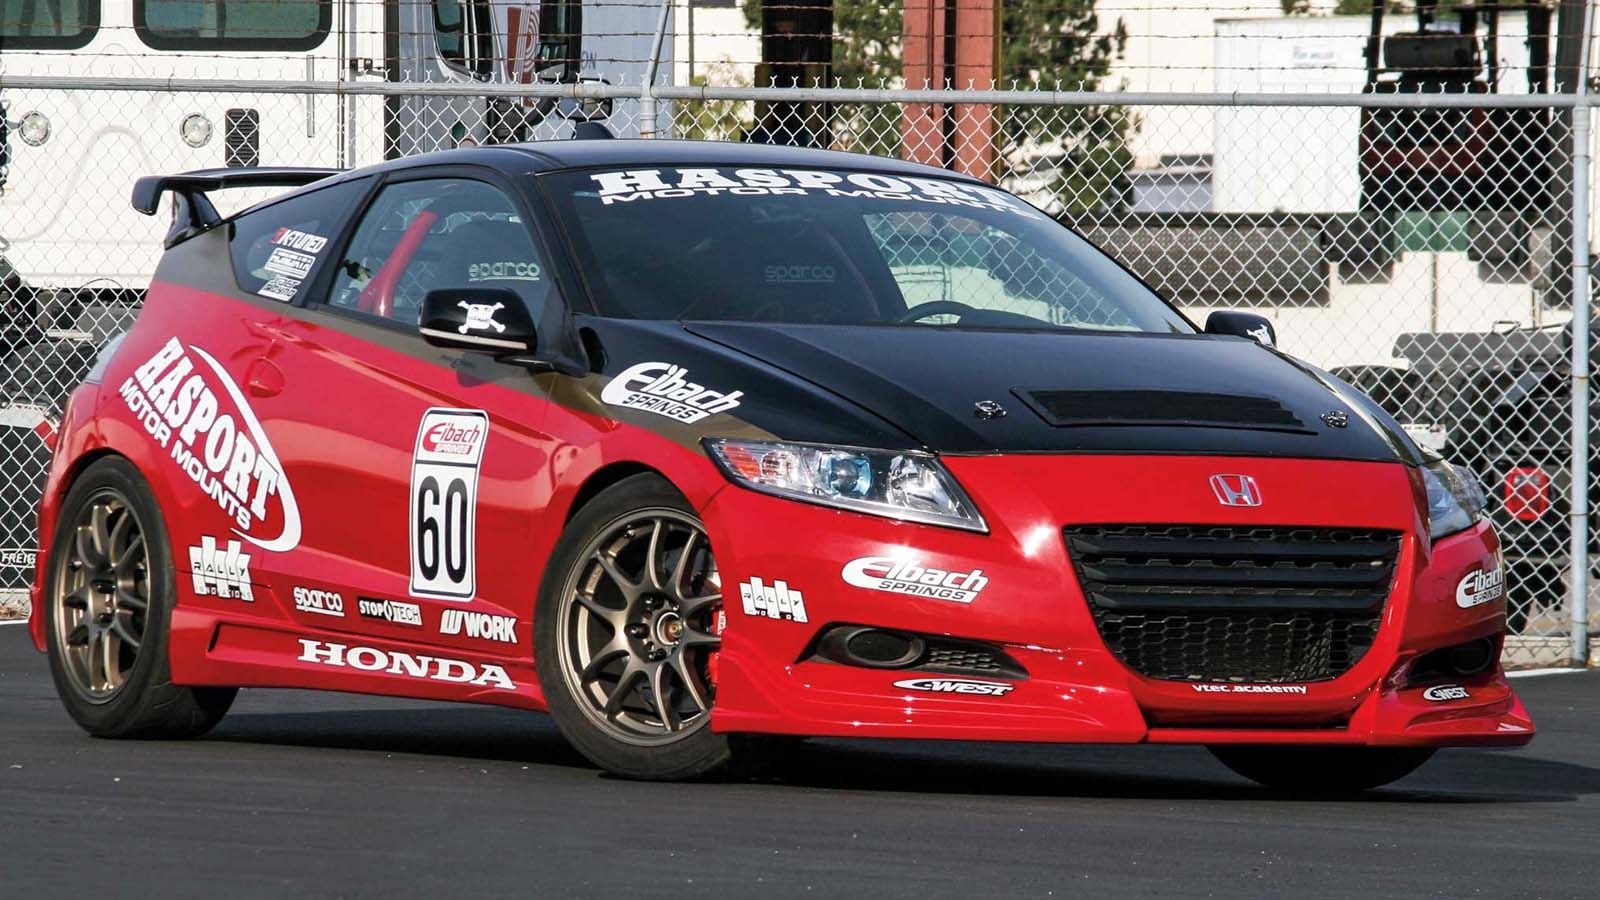 Pick of the Day: 2011 Honda CR-Z, it was customized on Mythbusters